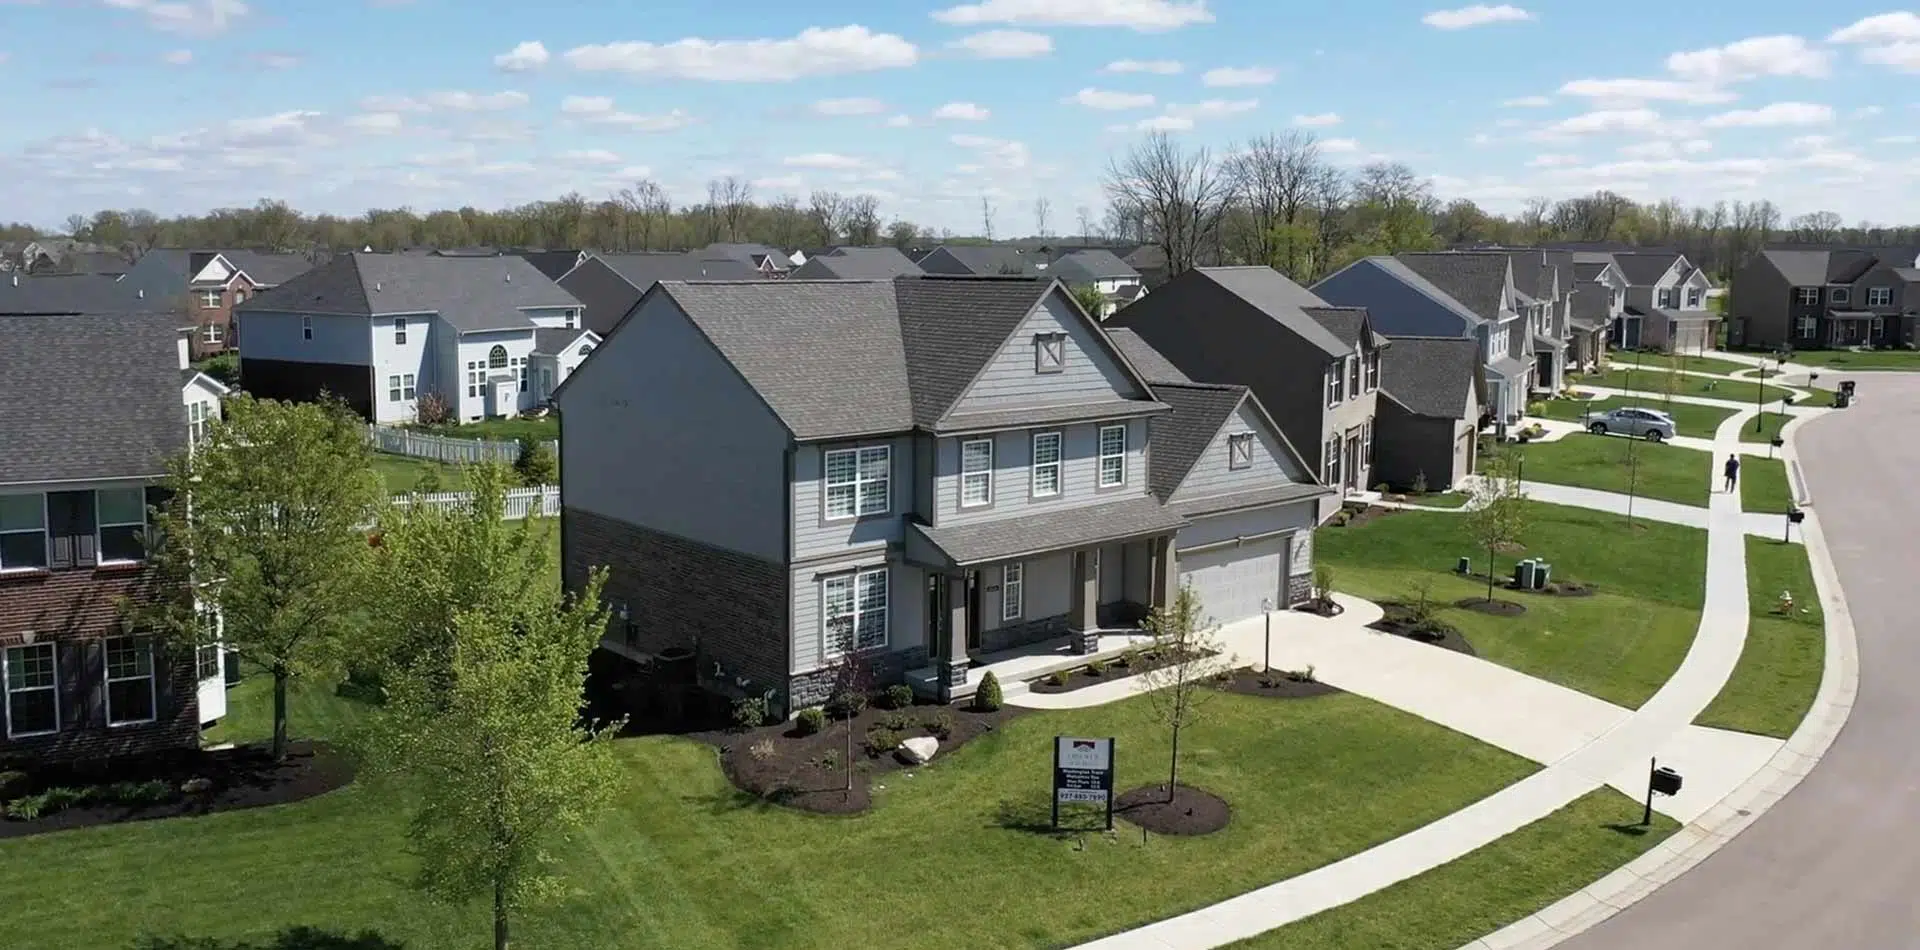 Aerial view of the Washington Trace community built by Oberer Homes